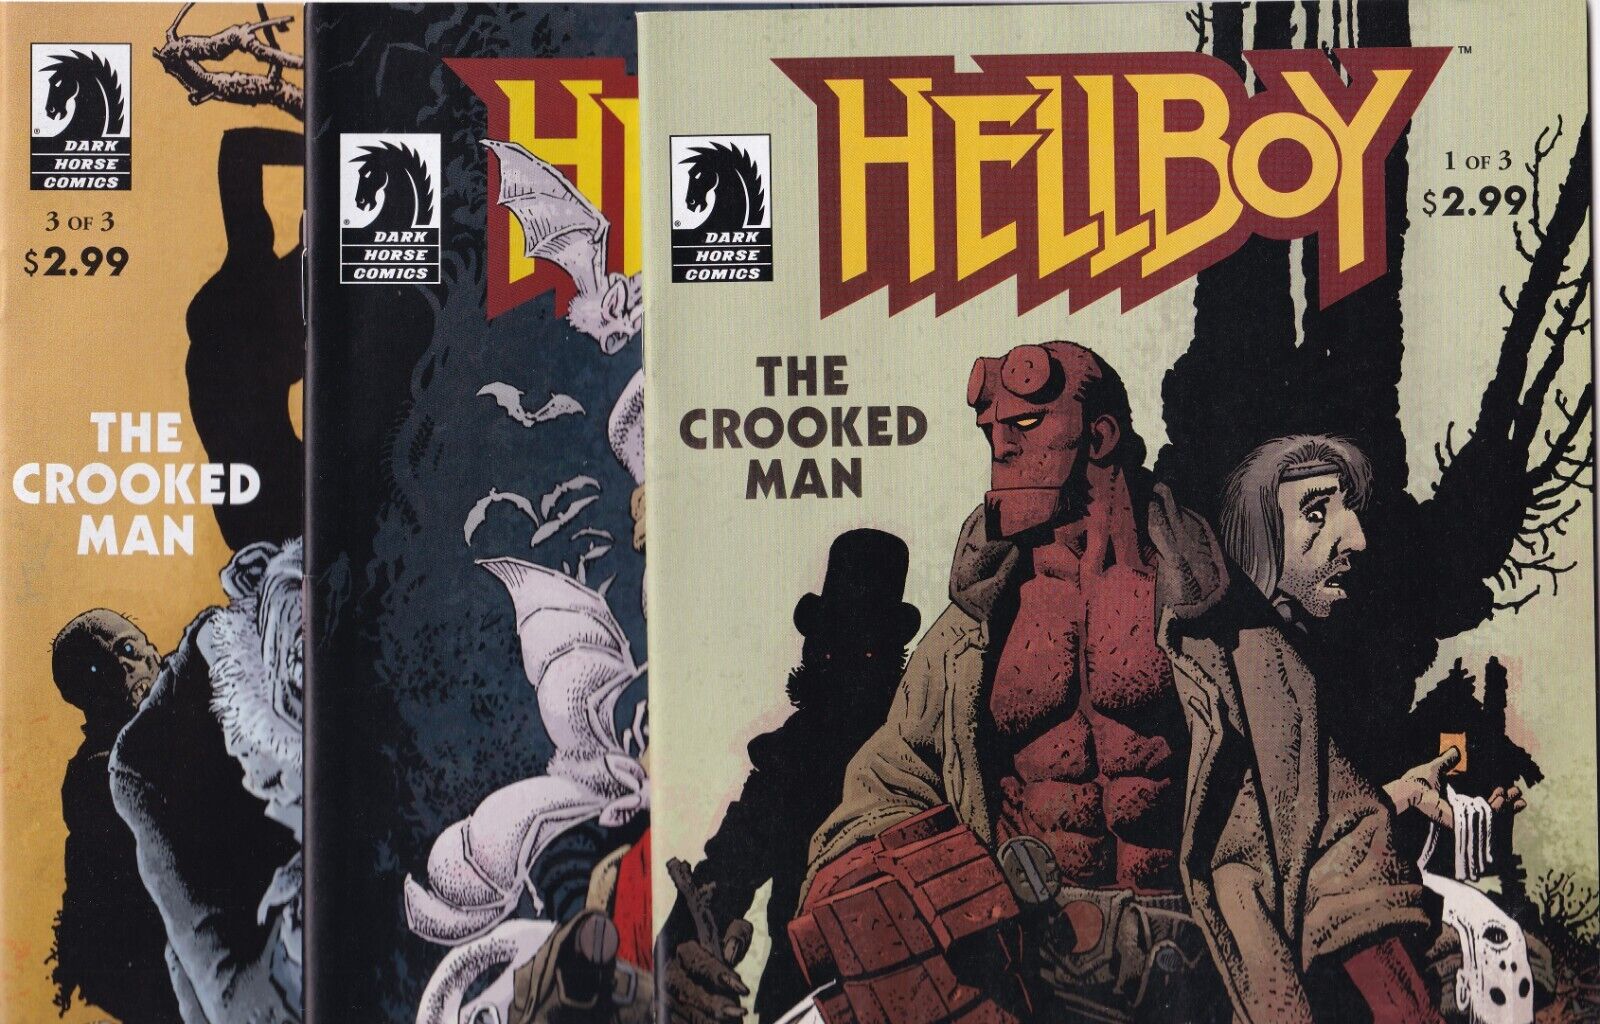 Hellboy #1-3 The Crooked Man Complete Run Lot of 3 (Dark Horse Comics, 2008)